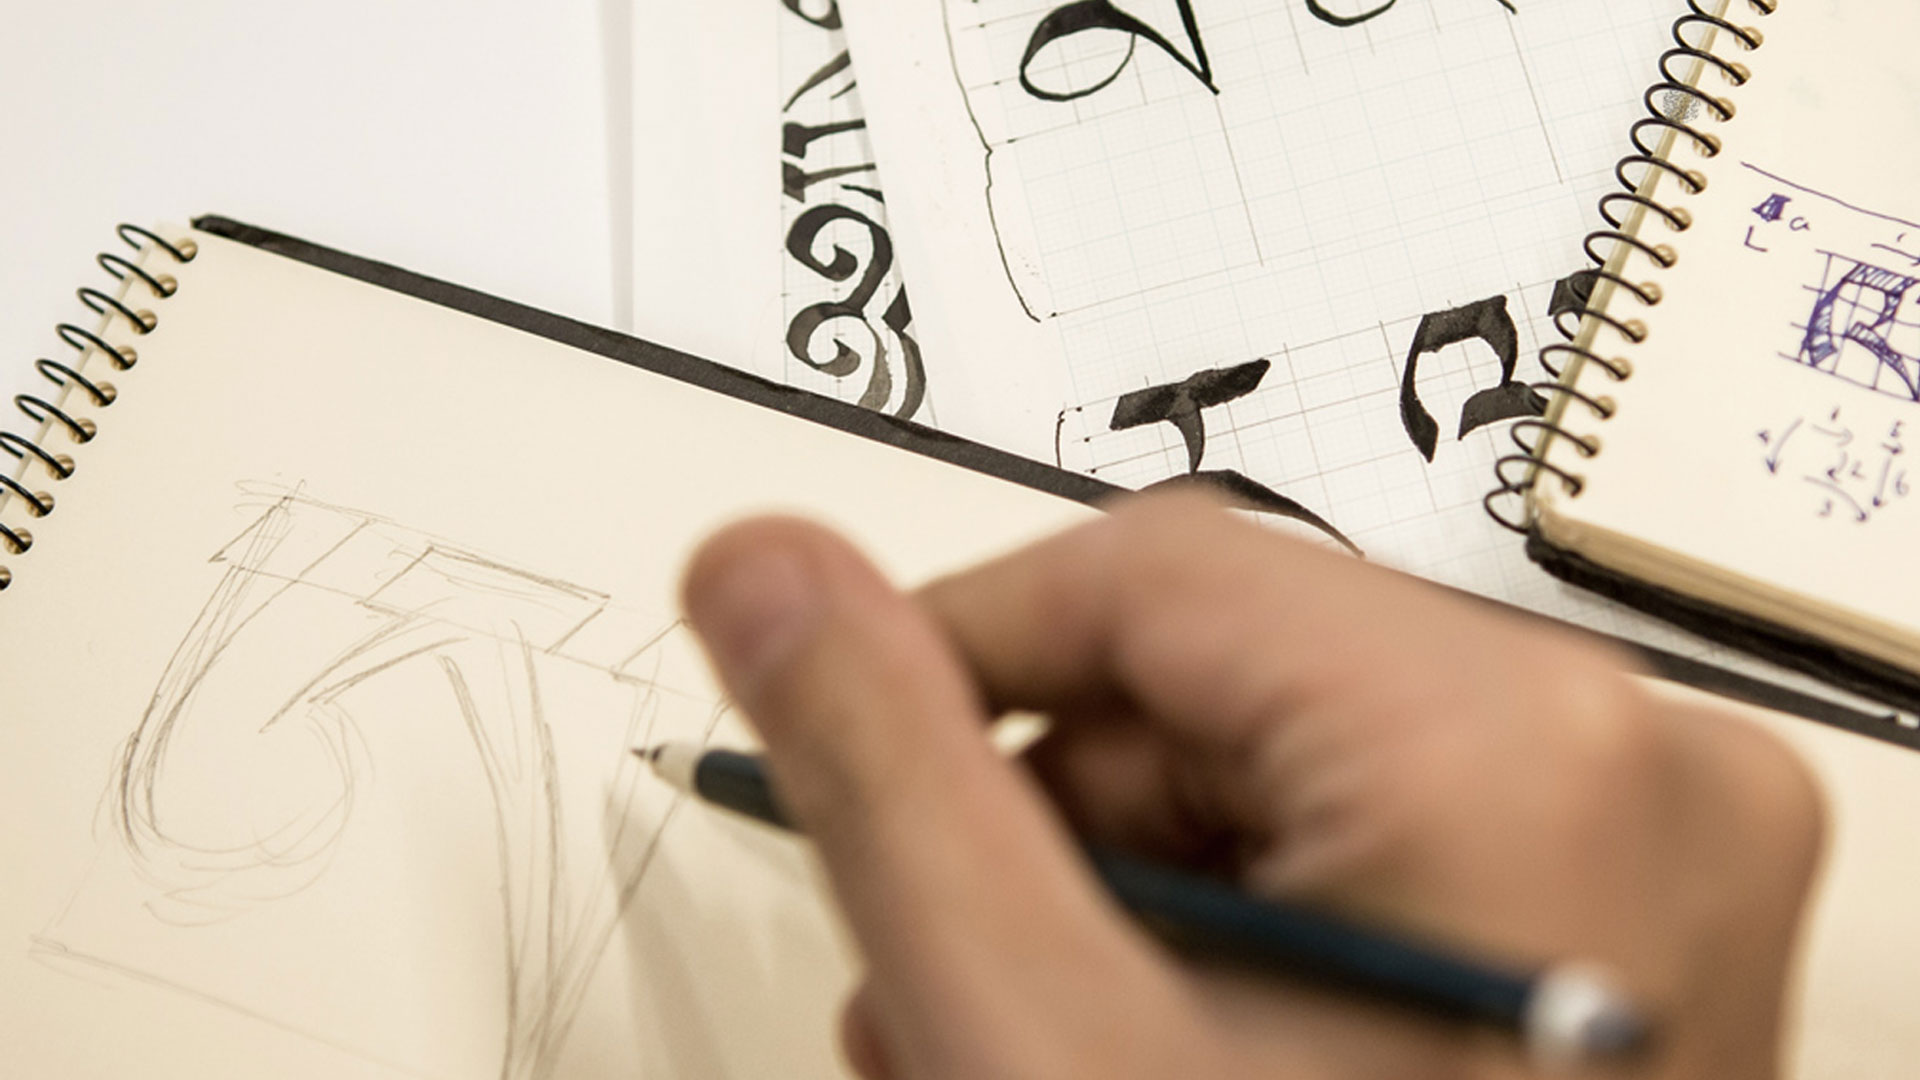 Foregin language fonts, image person drawing letters.